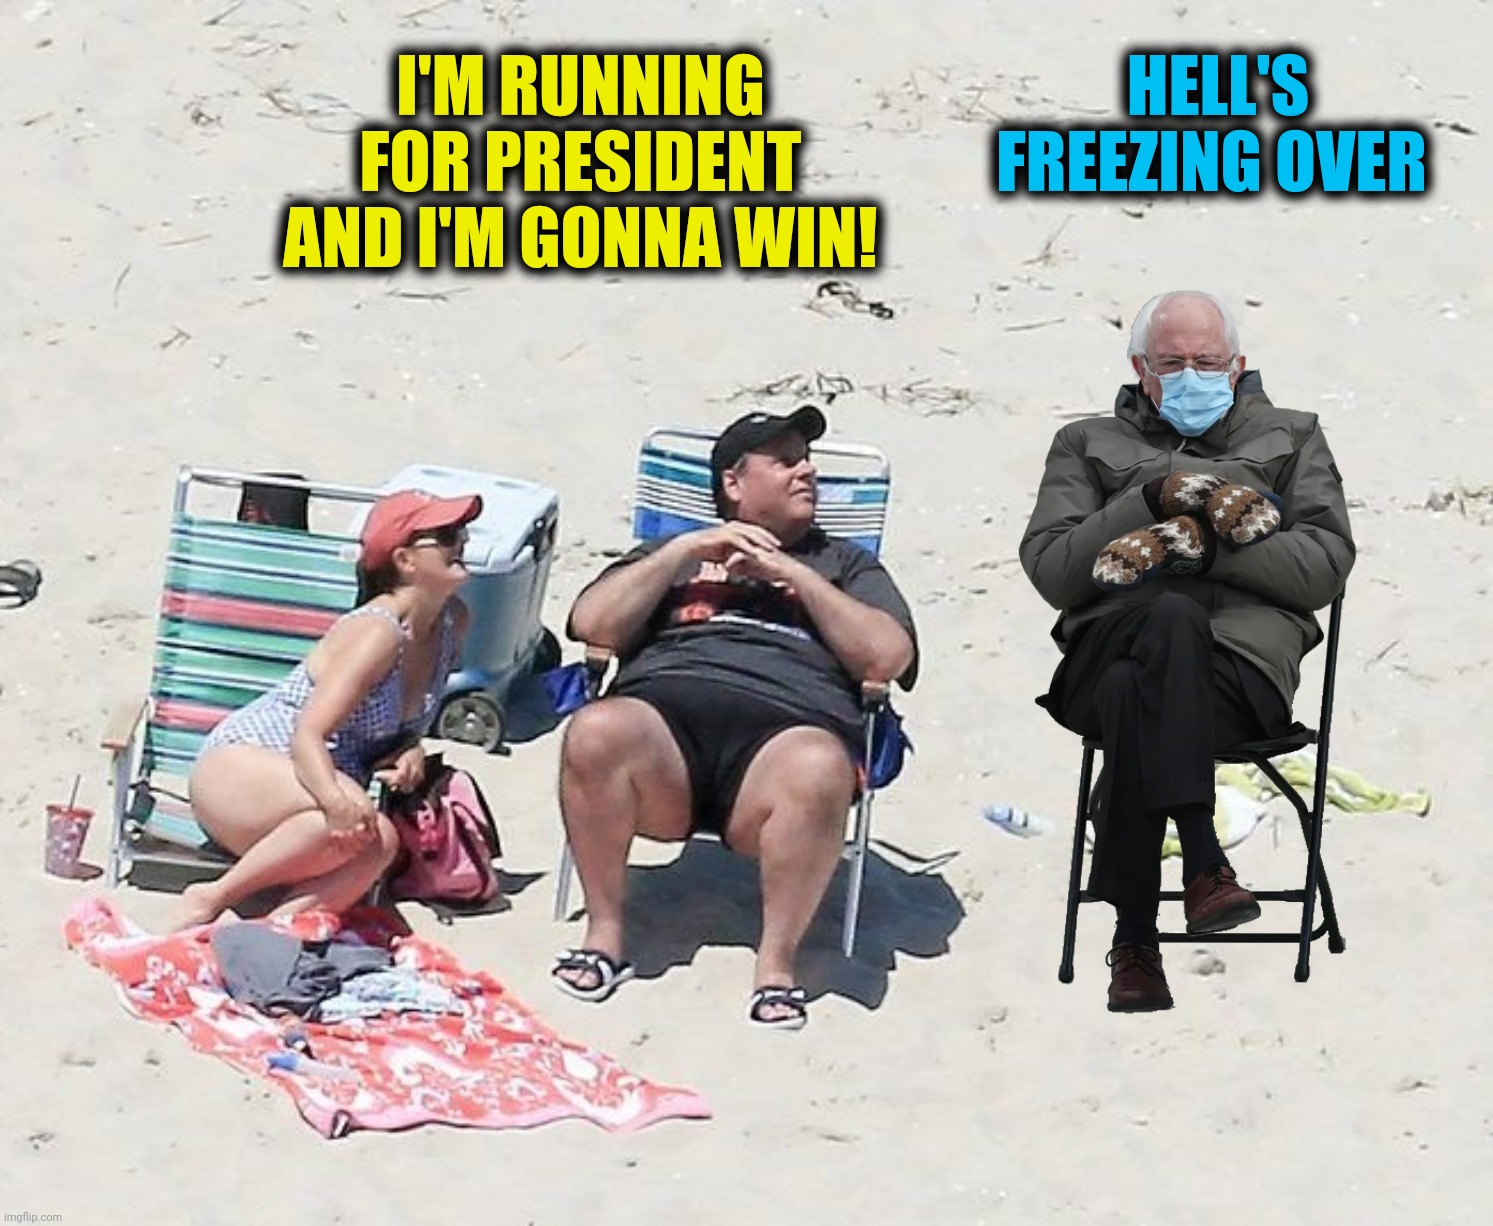 On The Beach | I'M RUNNING FOR PRESIDENT AND I'M GONNA WIN! HELL'S FREEZING OVER | image tagged in bad photoshop,bernie sanders,chris christie,beach,president | made w/ Imgflip meme maker